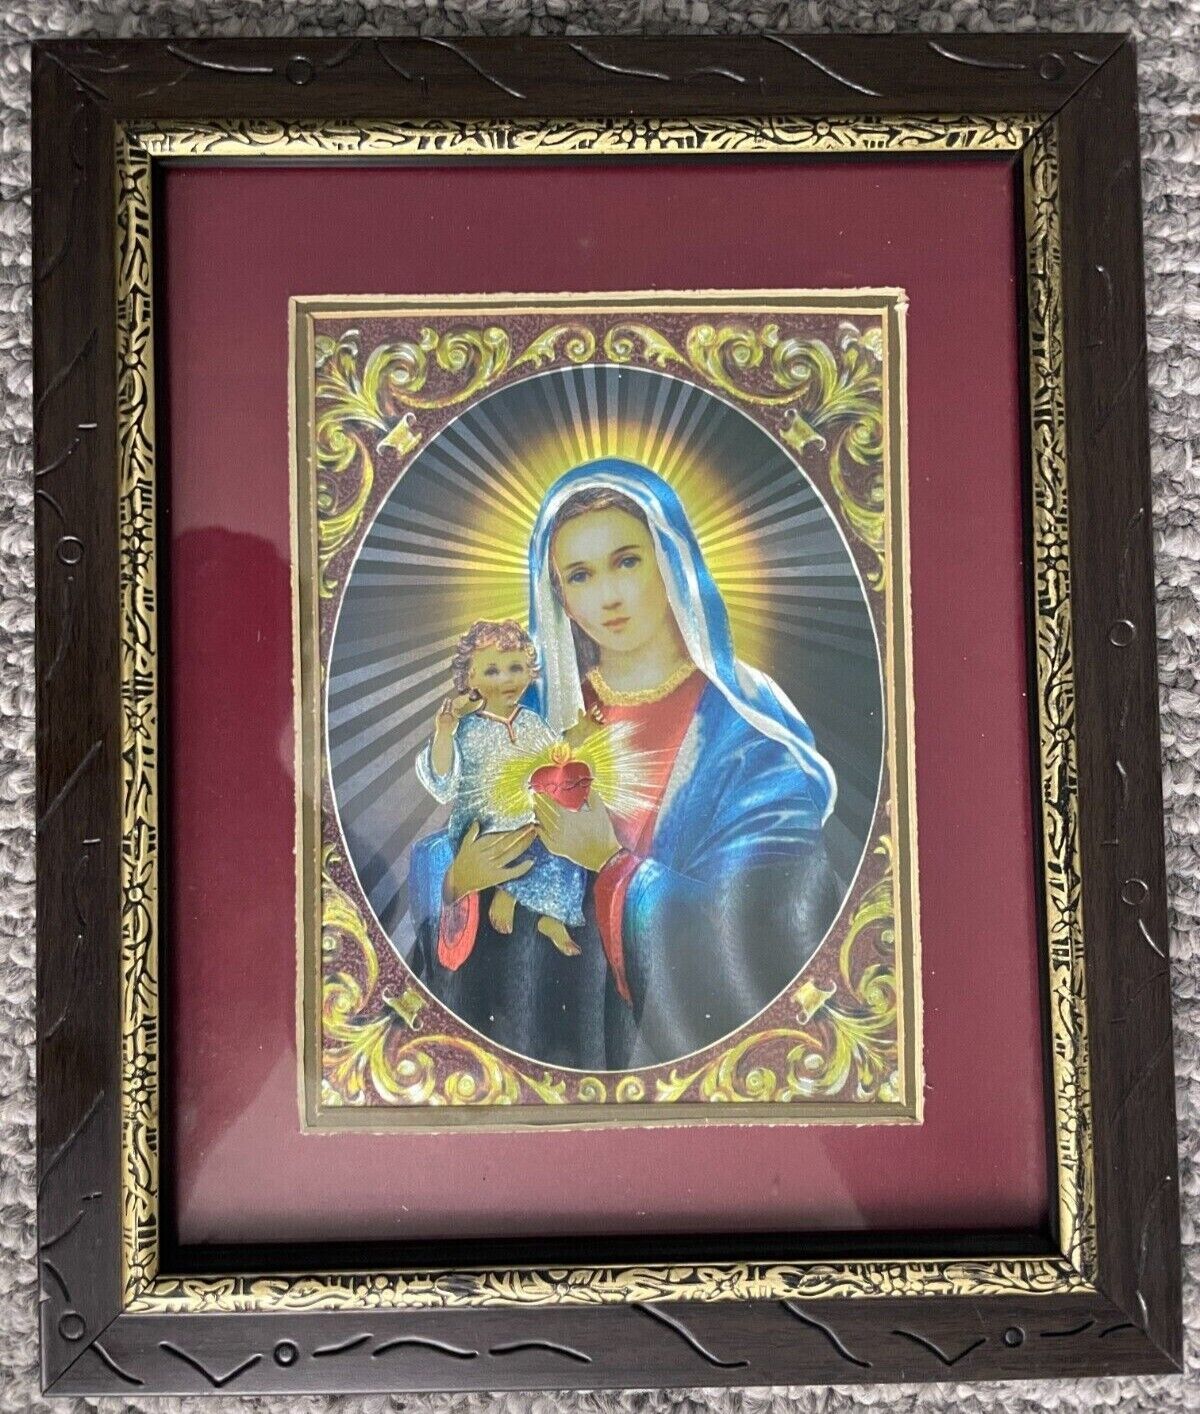 Rare Antique Virgin Mary Baby Jesus Sacred Heart Print in Wood Frame 13